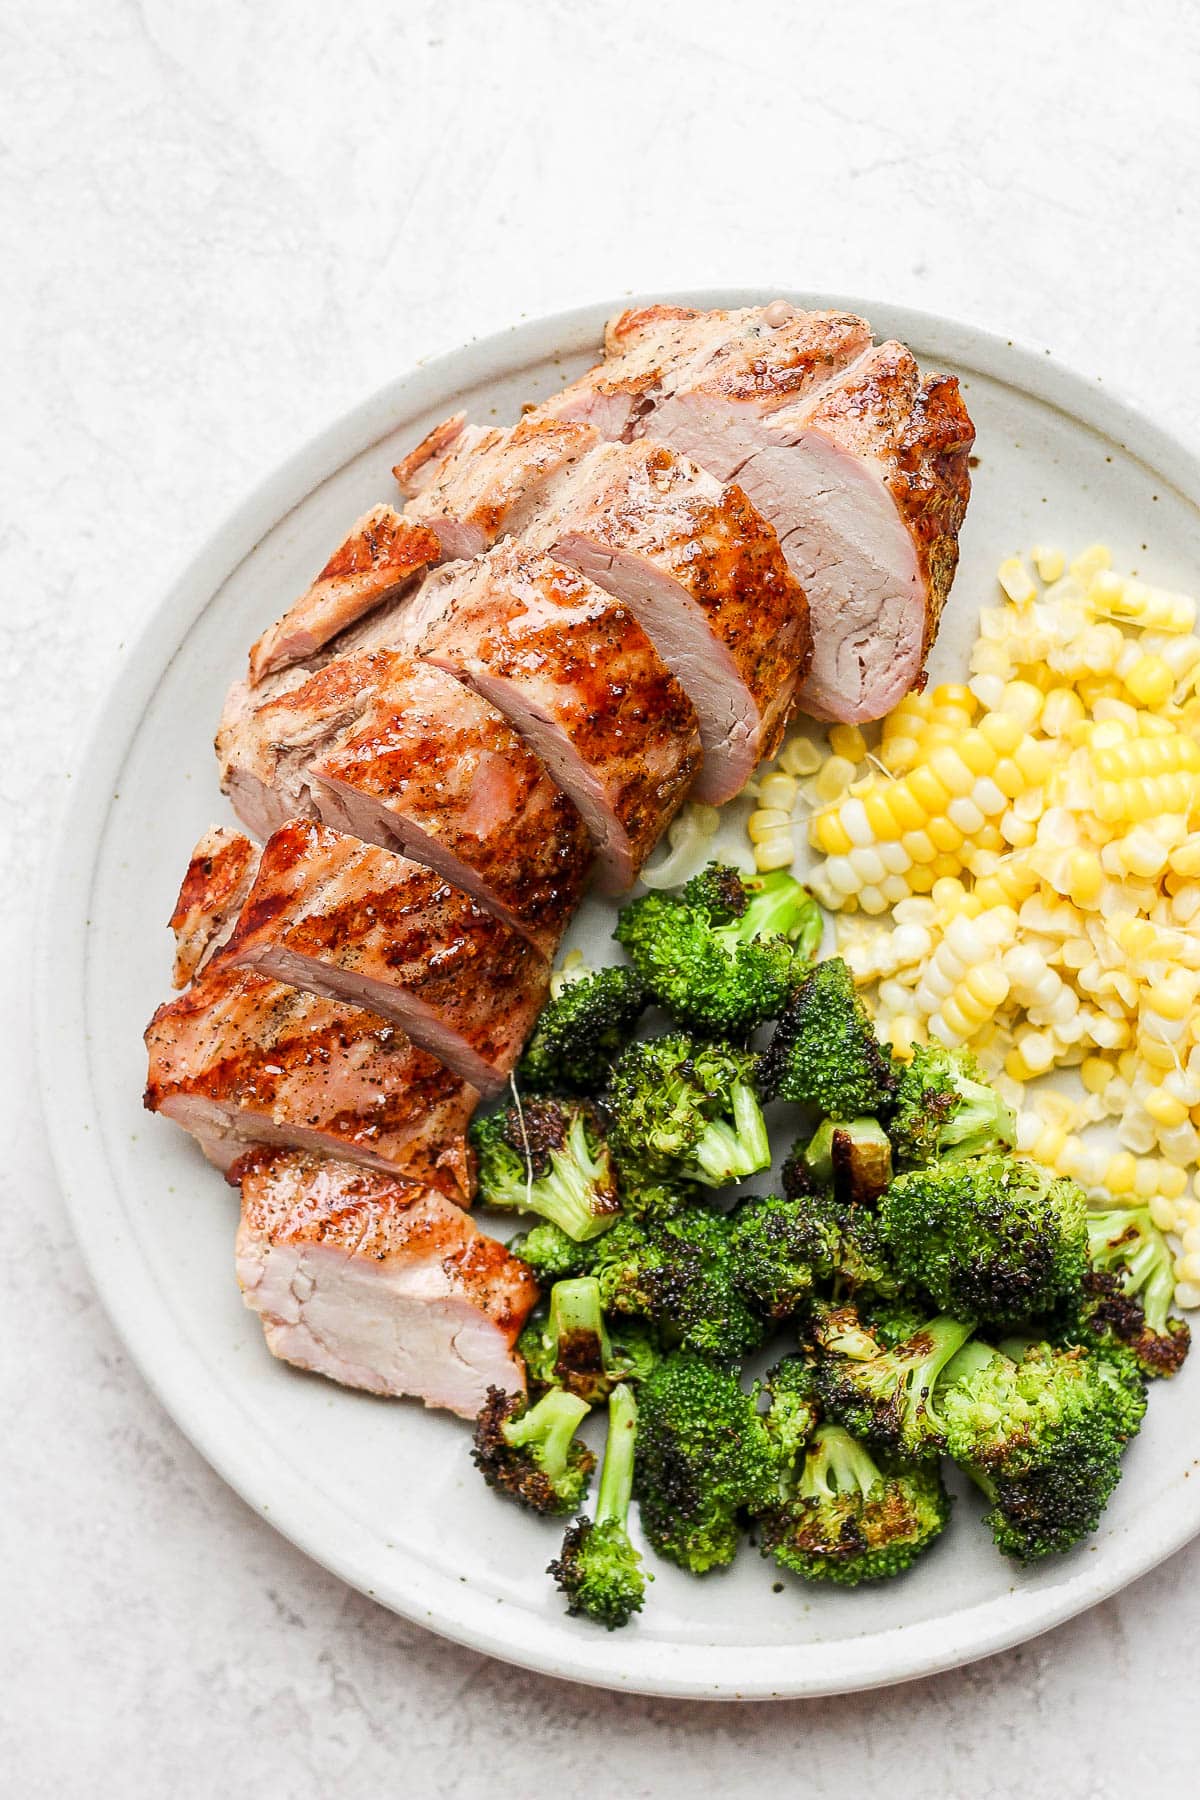 A plate of grilled pork tenderloin, sliced, with corn and broccoli.